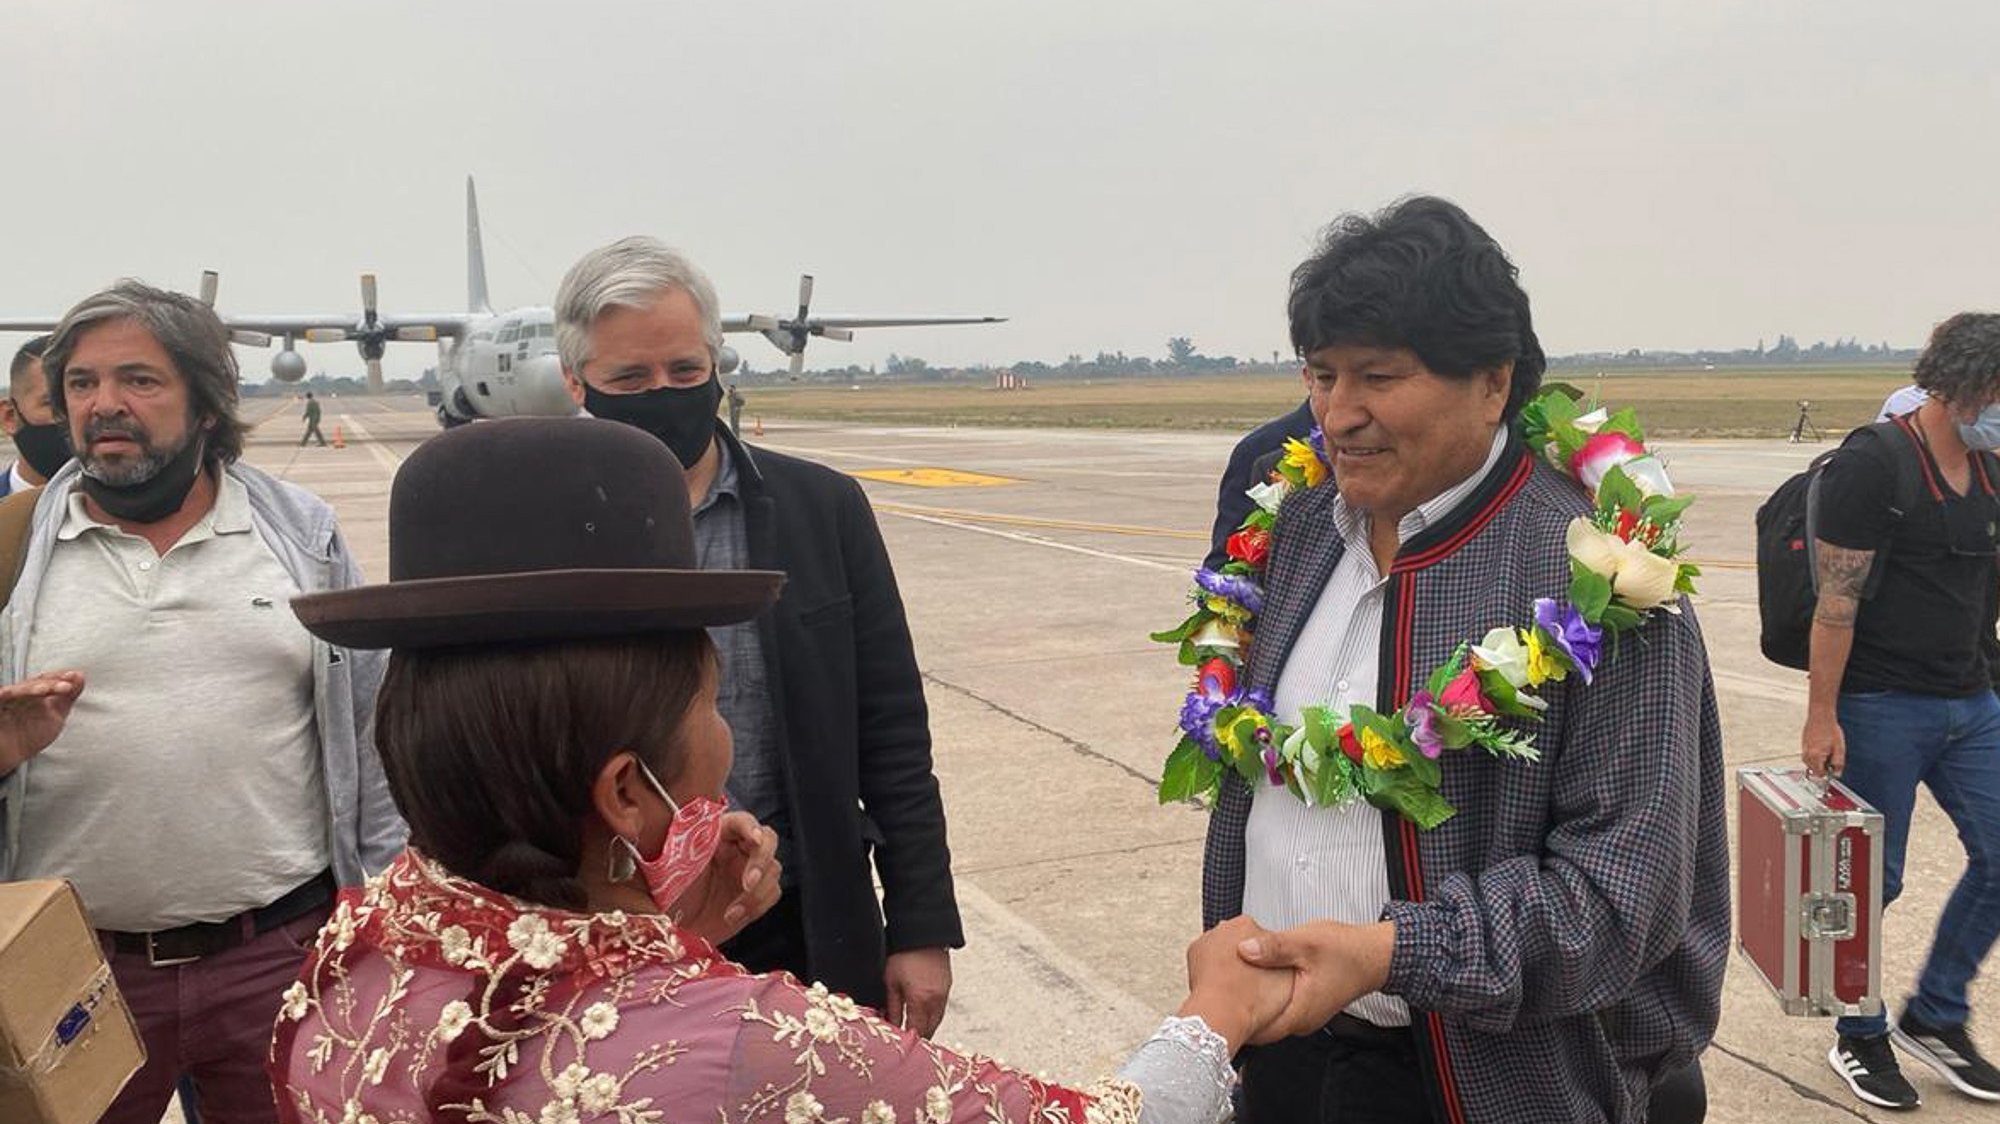 epa08808994 A handout photo made available by Evo Morales press office shows former President of Bolivia, Evo Morales (R), as he greets an indigenous woman upon arrival in the Province of Jujuy, Argentina, 08 November 2020. Morales plans to return to his country after a year of exile, stating that he was forced by a coup. He is expected to be received by a caravan as soon as he enters Bolivia from the border with Argentina, where he has remained since his departure from his home country.  EPA/EVO MORALES PRESS OFFICE / HANDOUT  HANDOUT EDITORIAL USE ONLY/NO SALES